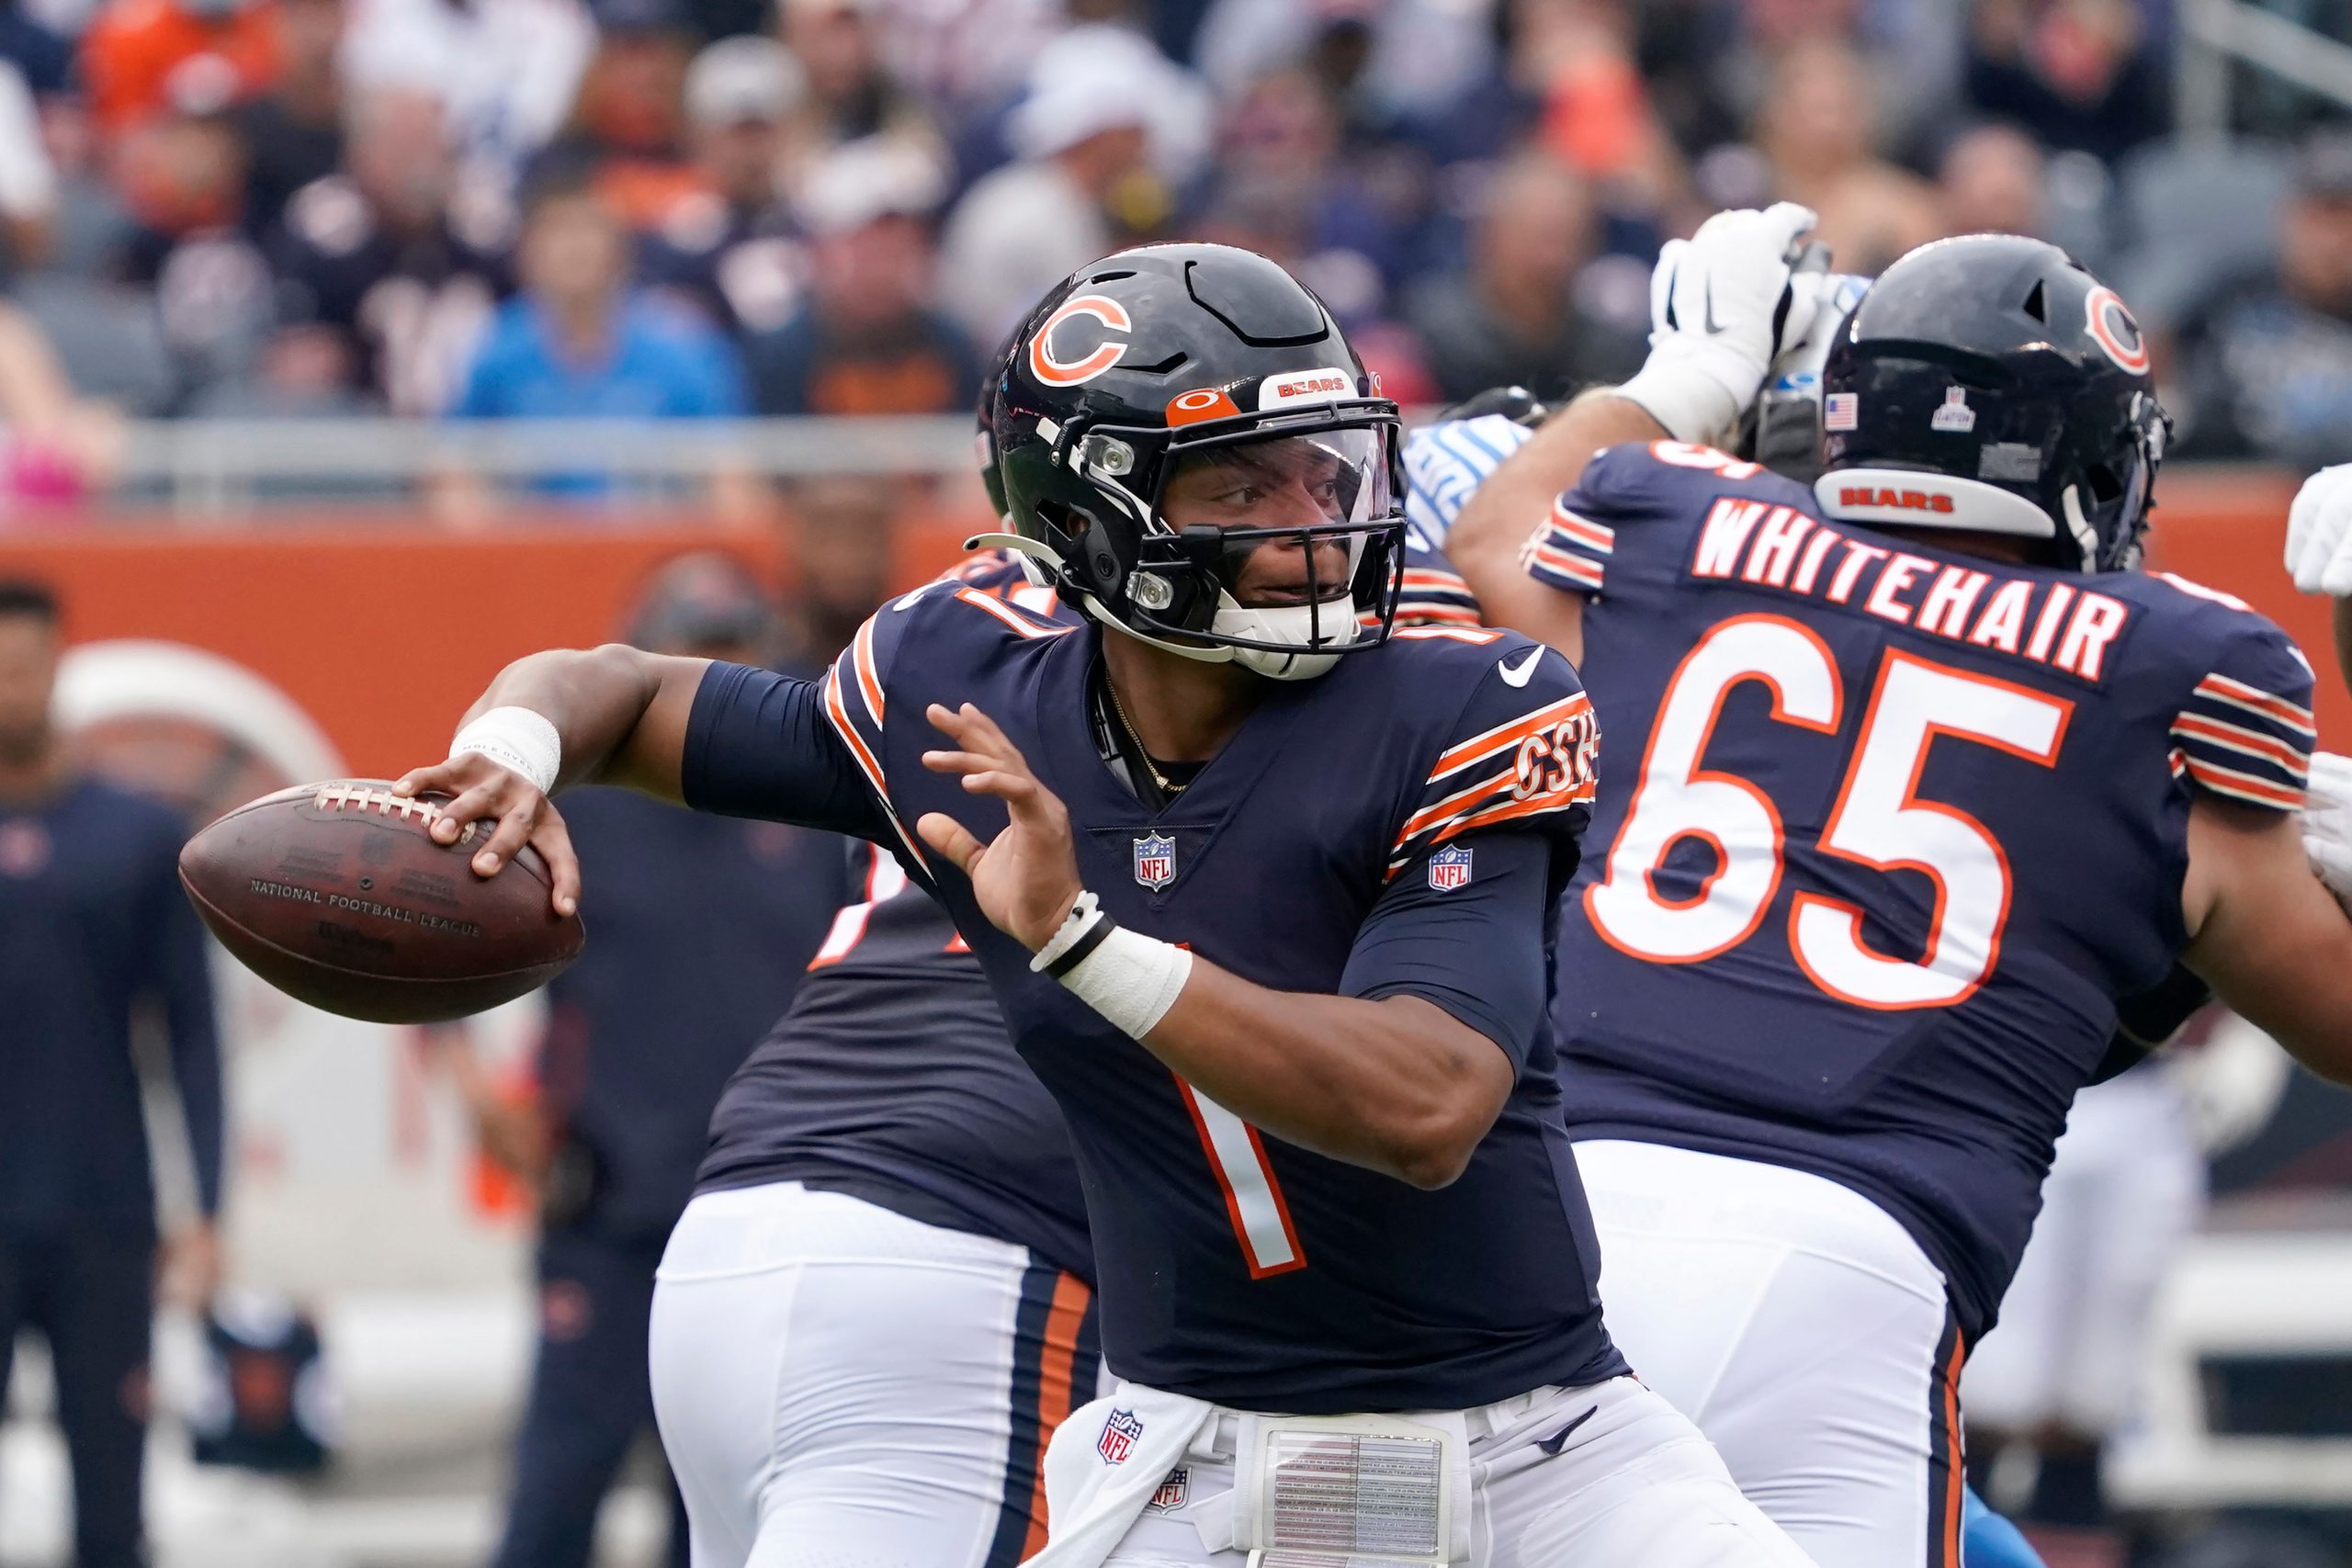 NFL: Rookie Justin Fields powers Chicago Bears to win vs Detroit Lions